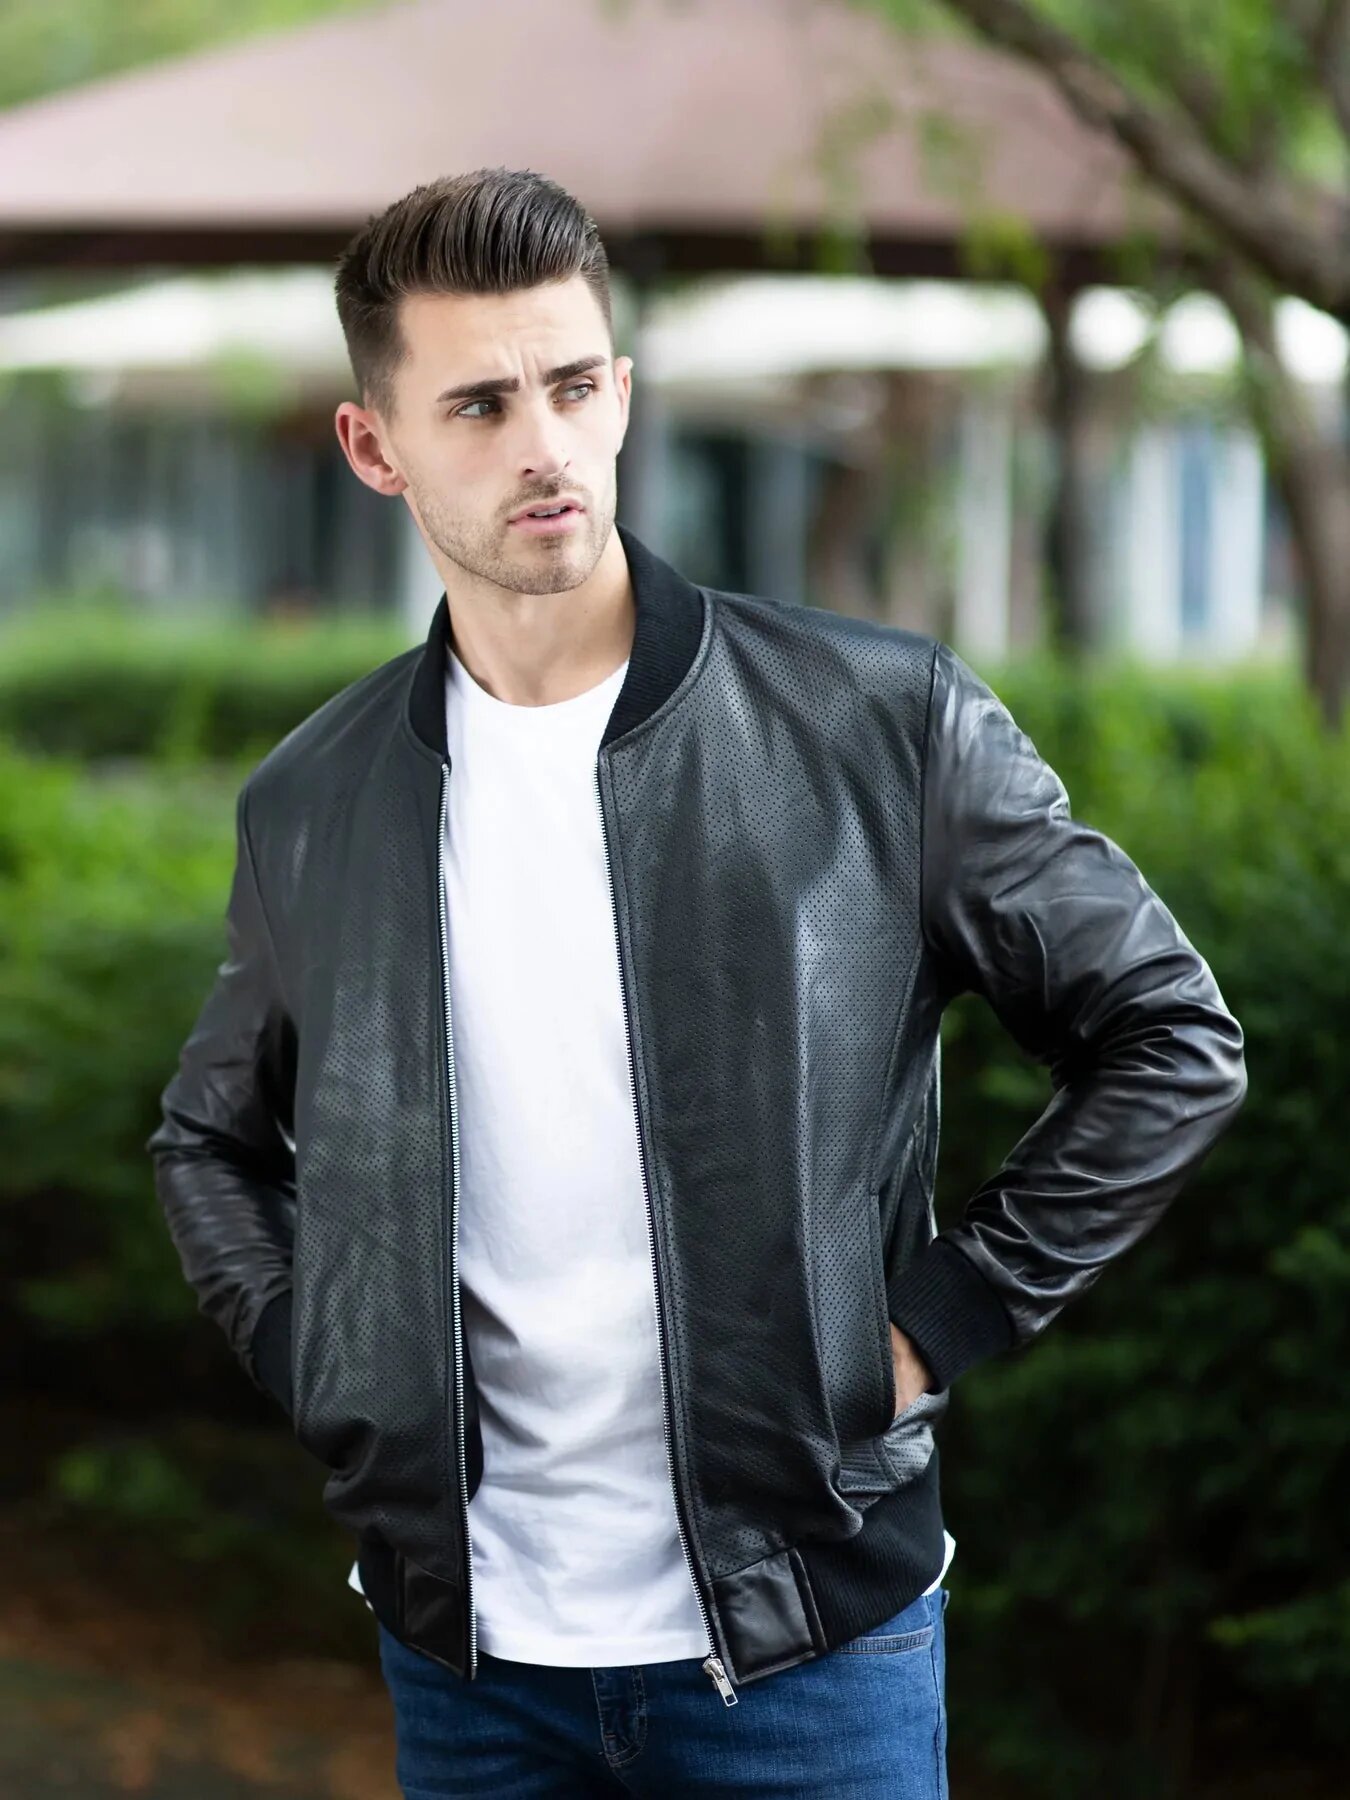 HOW OFTEN TO CONDITION LEATHER JACKET?